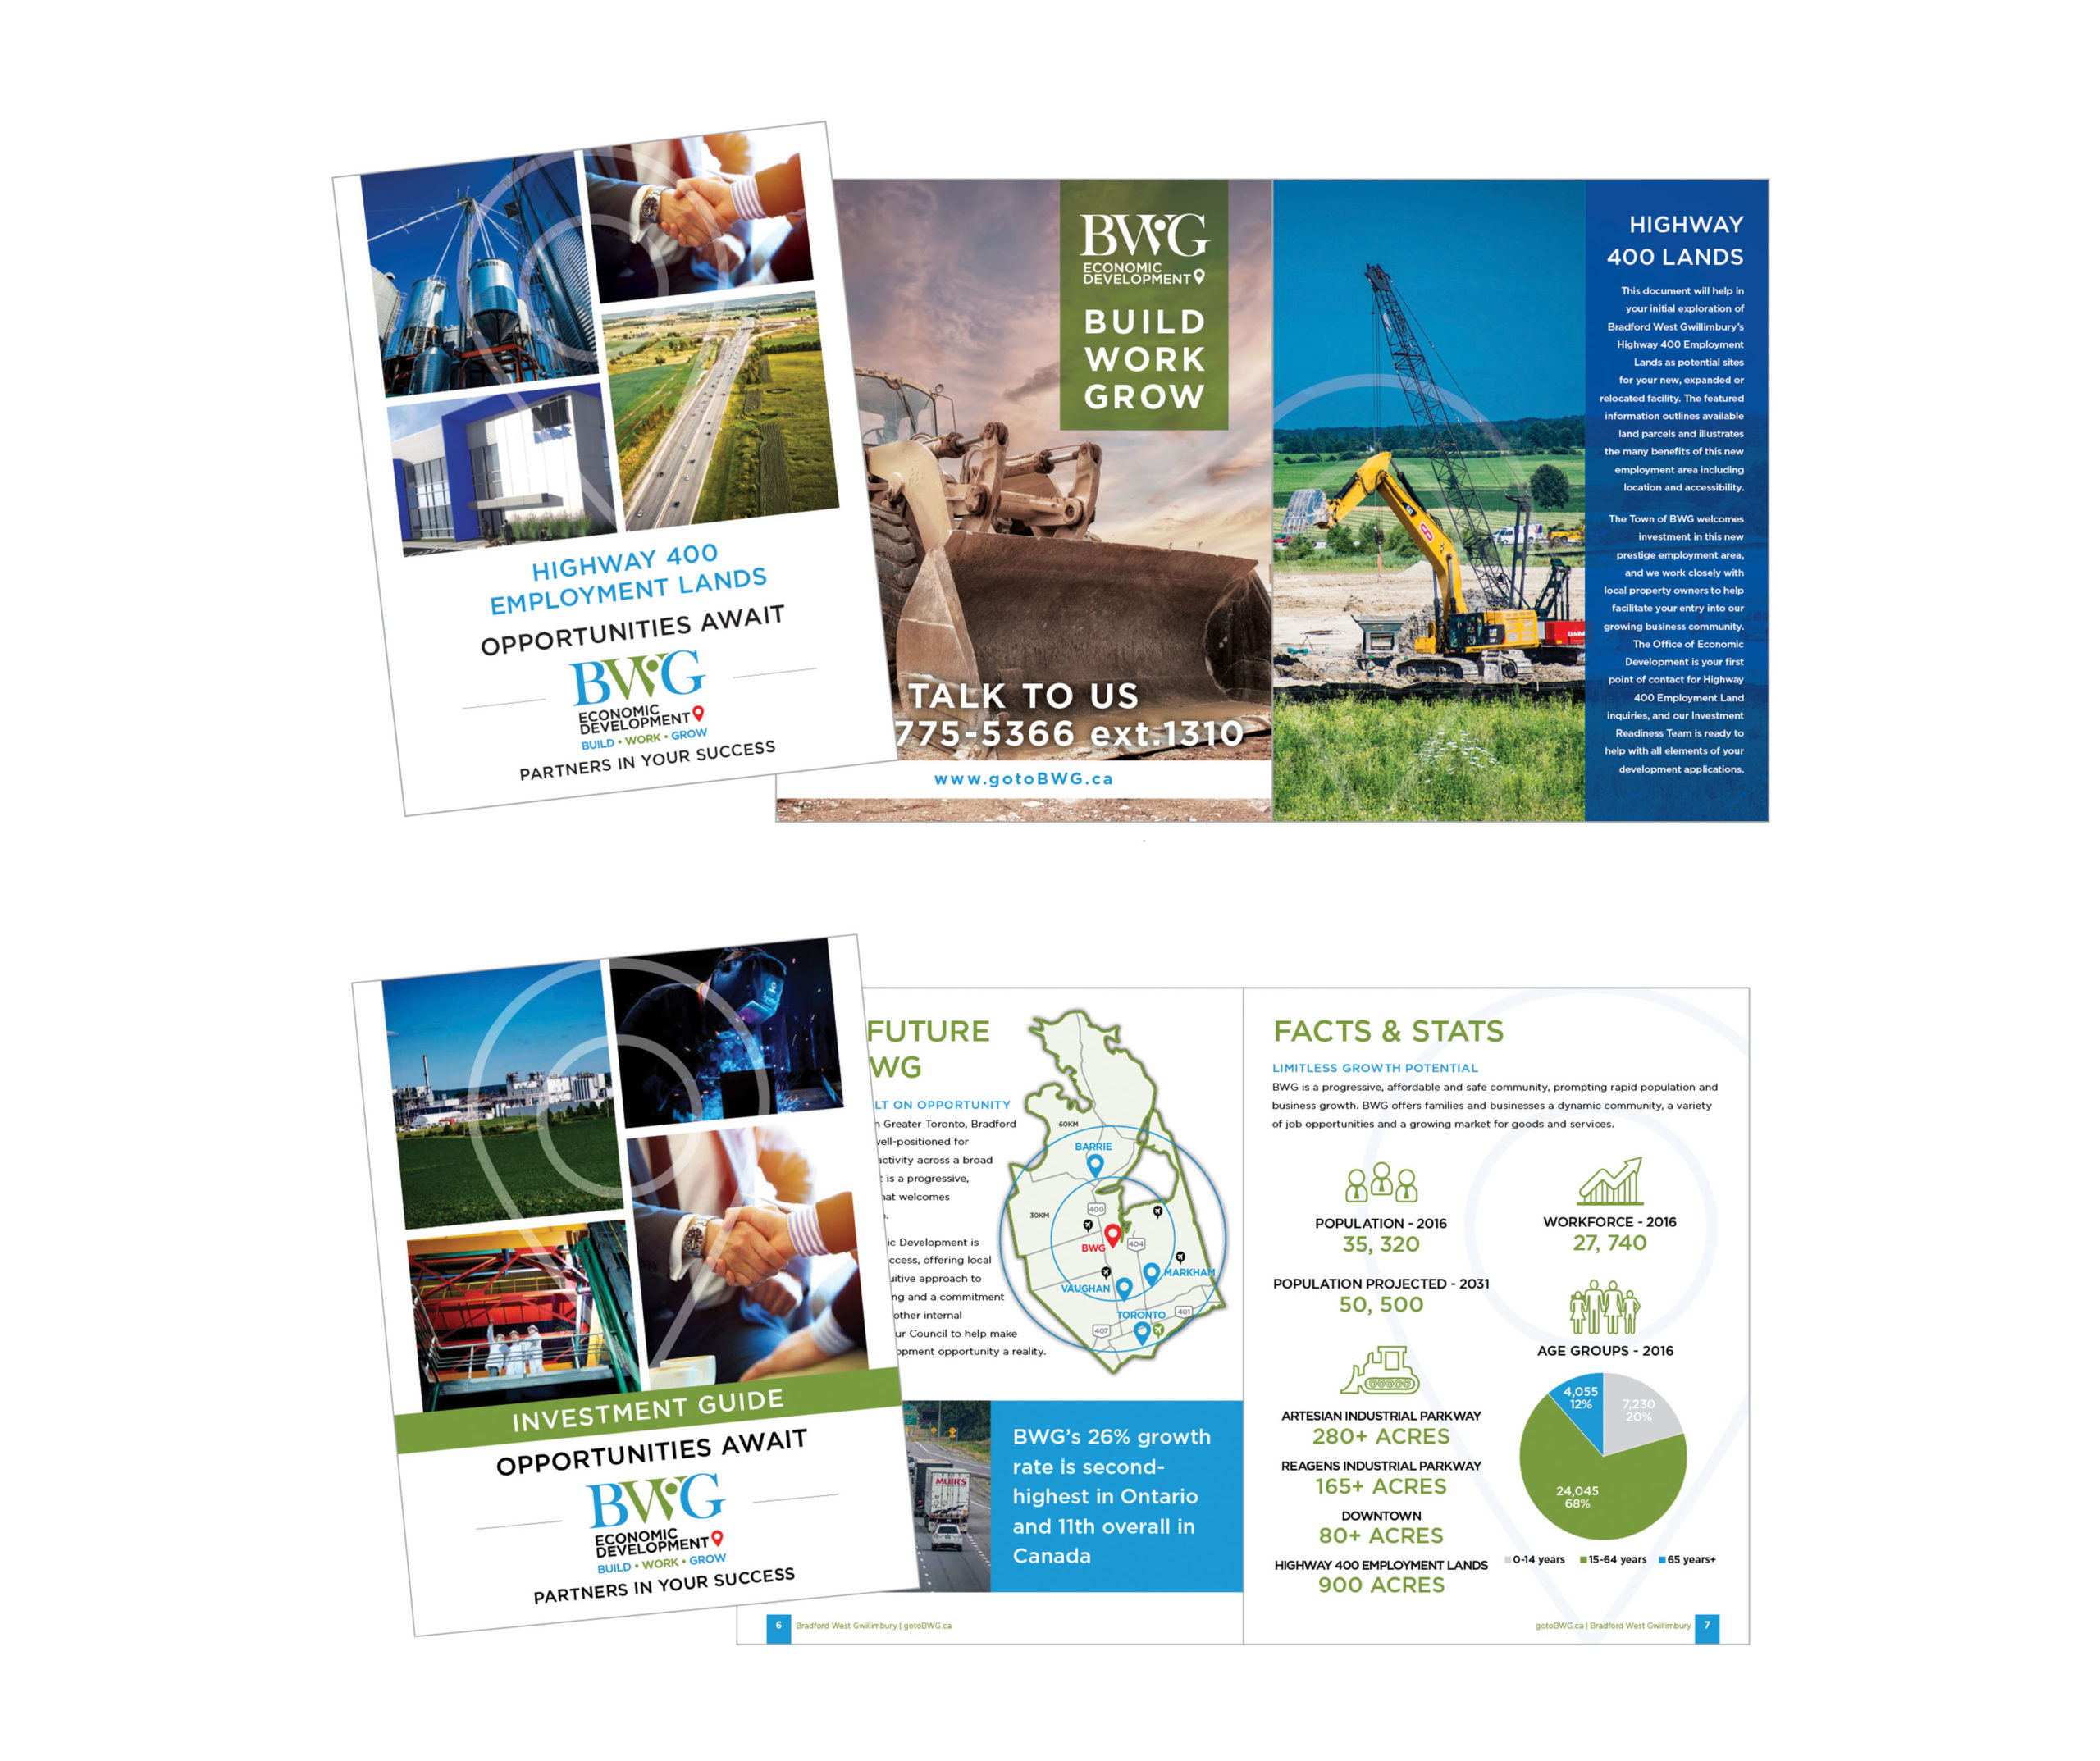 An image showing the cover and inside spread designs for two BWG promotional documents.